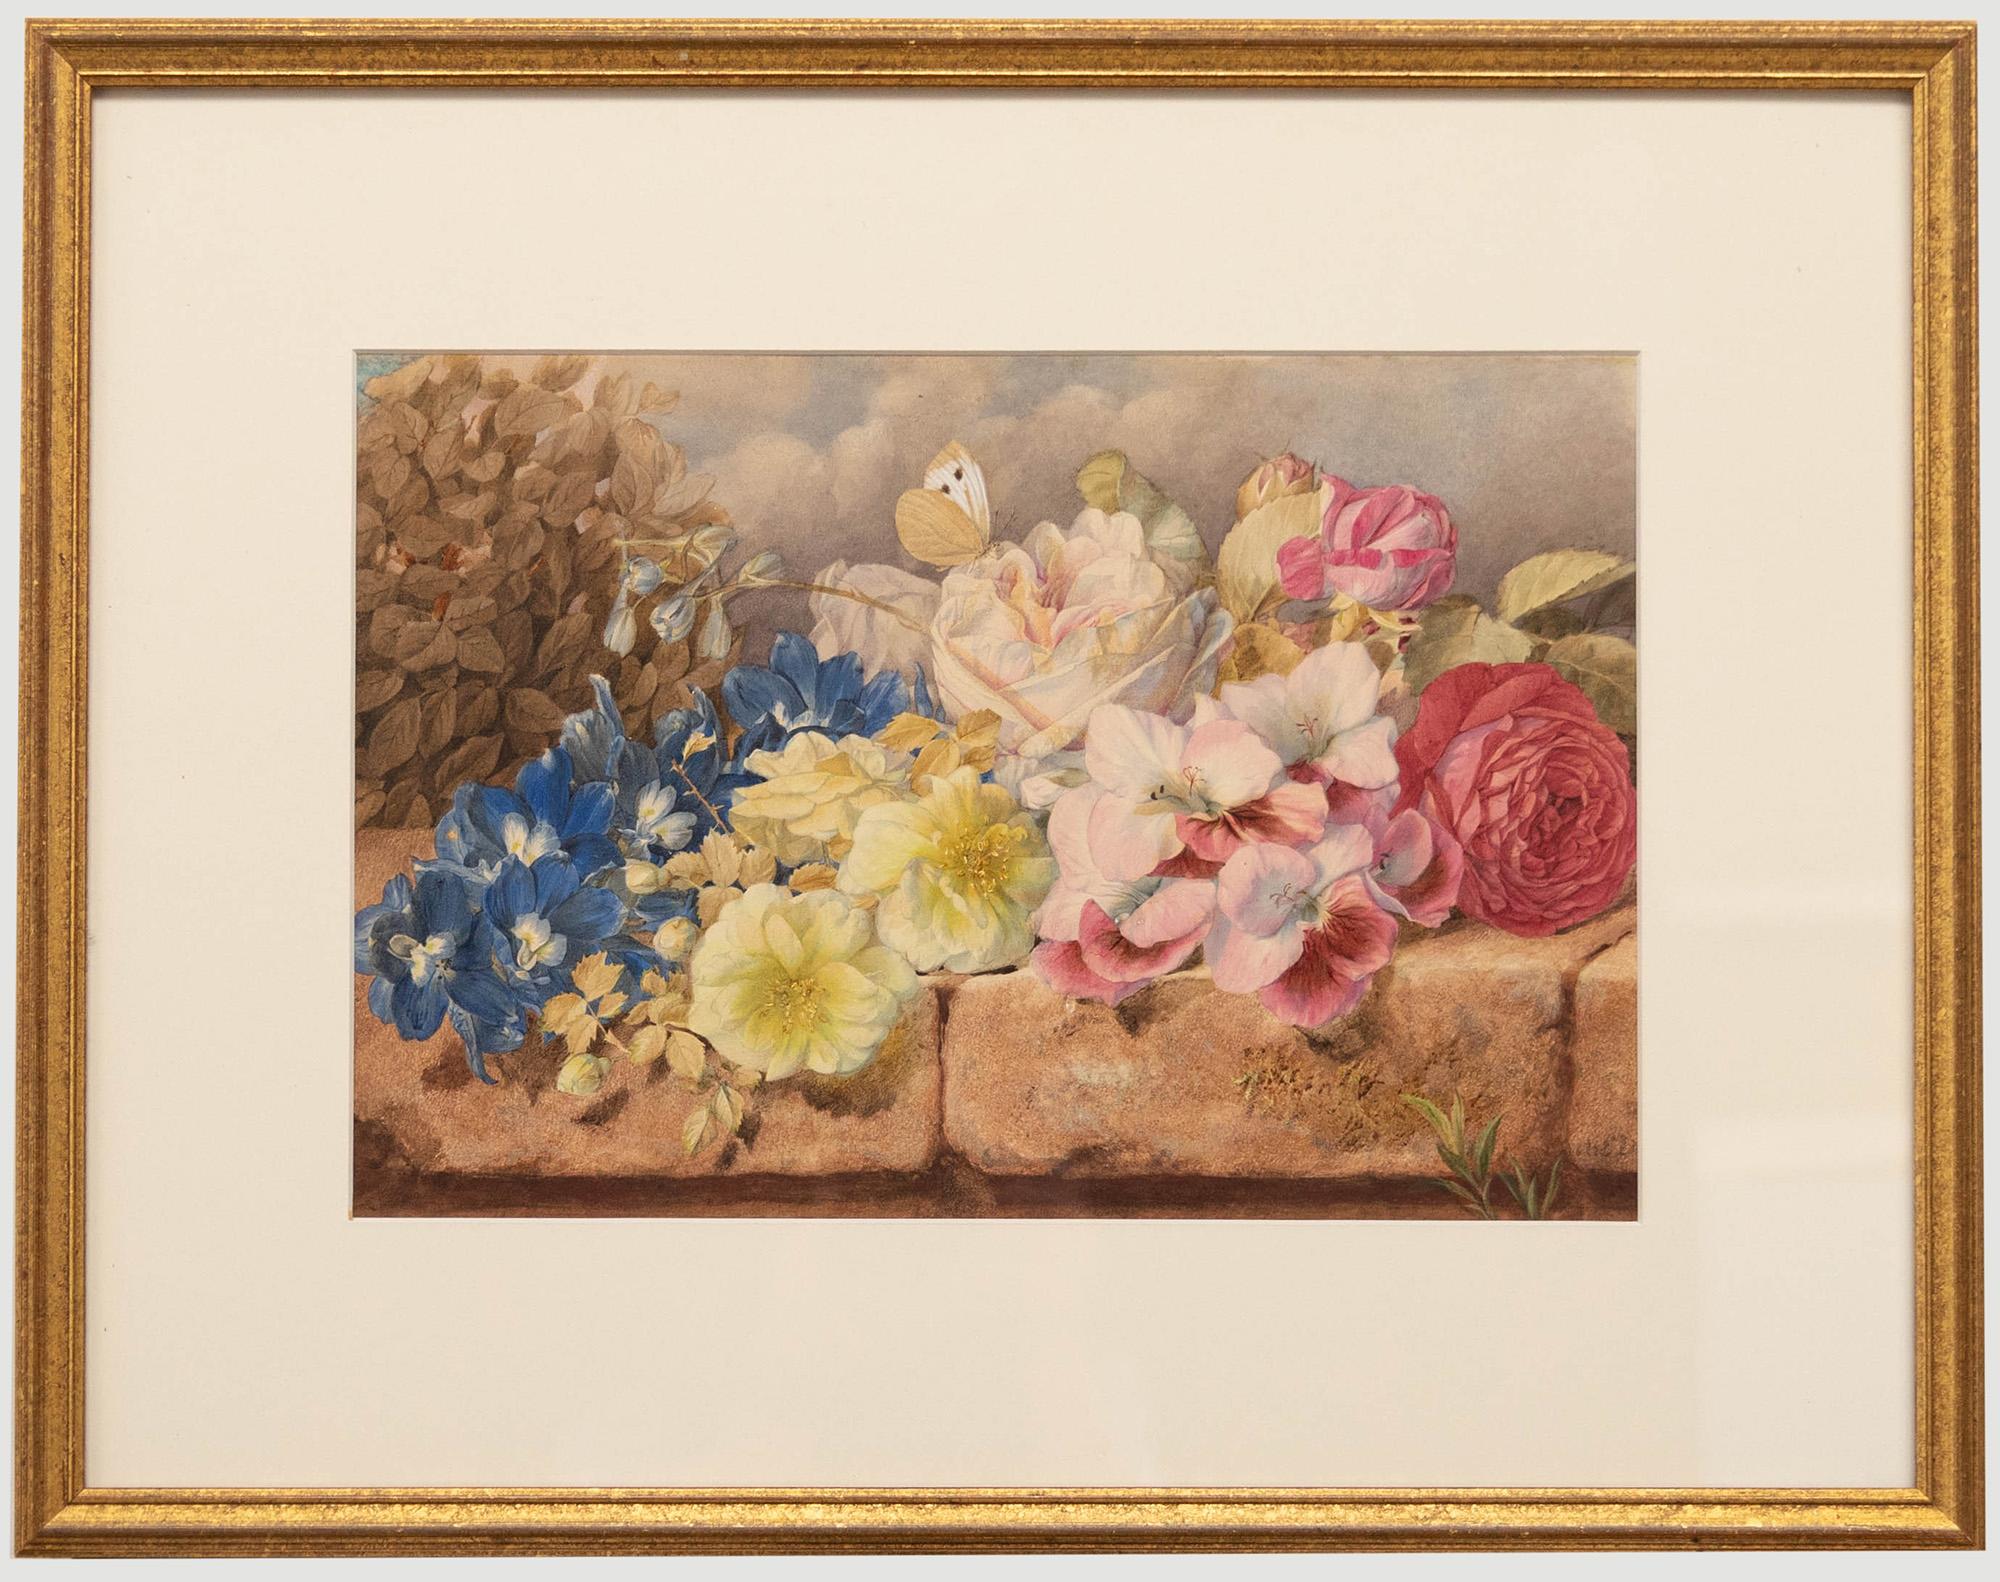 Original 19th century watercolour. A beautifully framed watercolour by Mary Elizabeth Duffield RI (1819-1914) who is best known for her watercolours of flowering plants. This particular study depicts roses and delphiniums resting on a stone wall